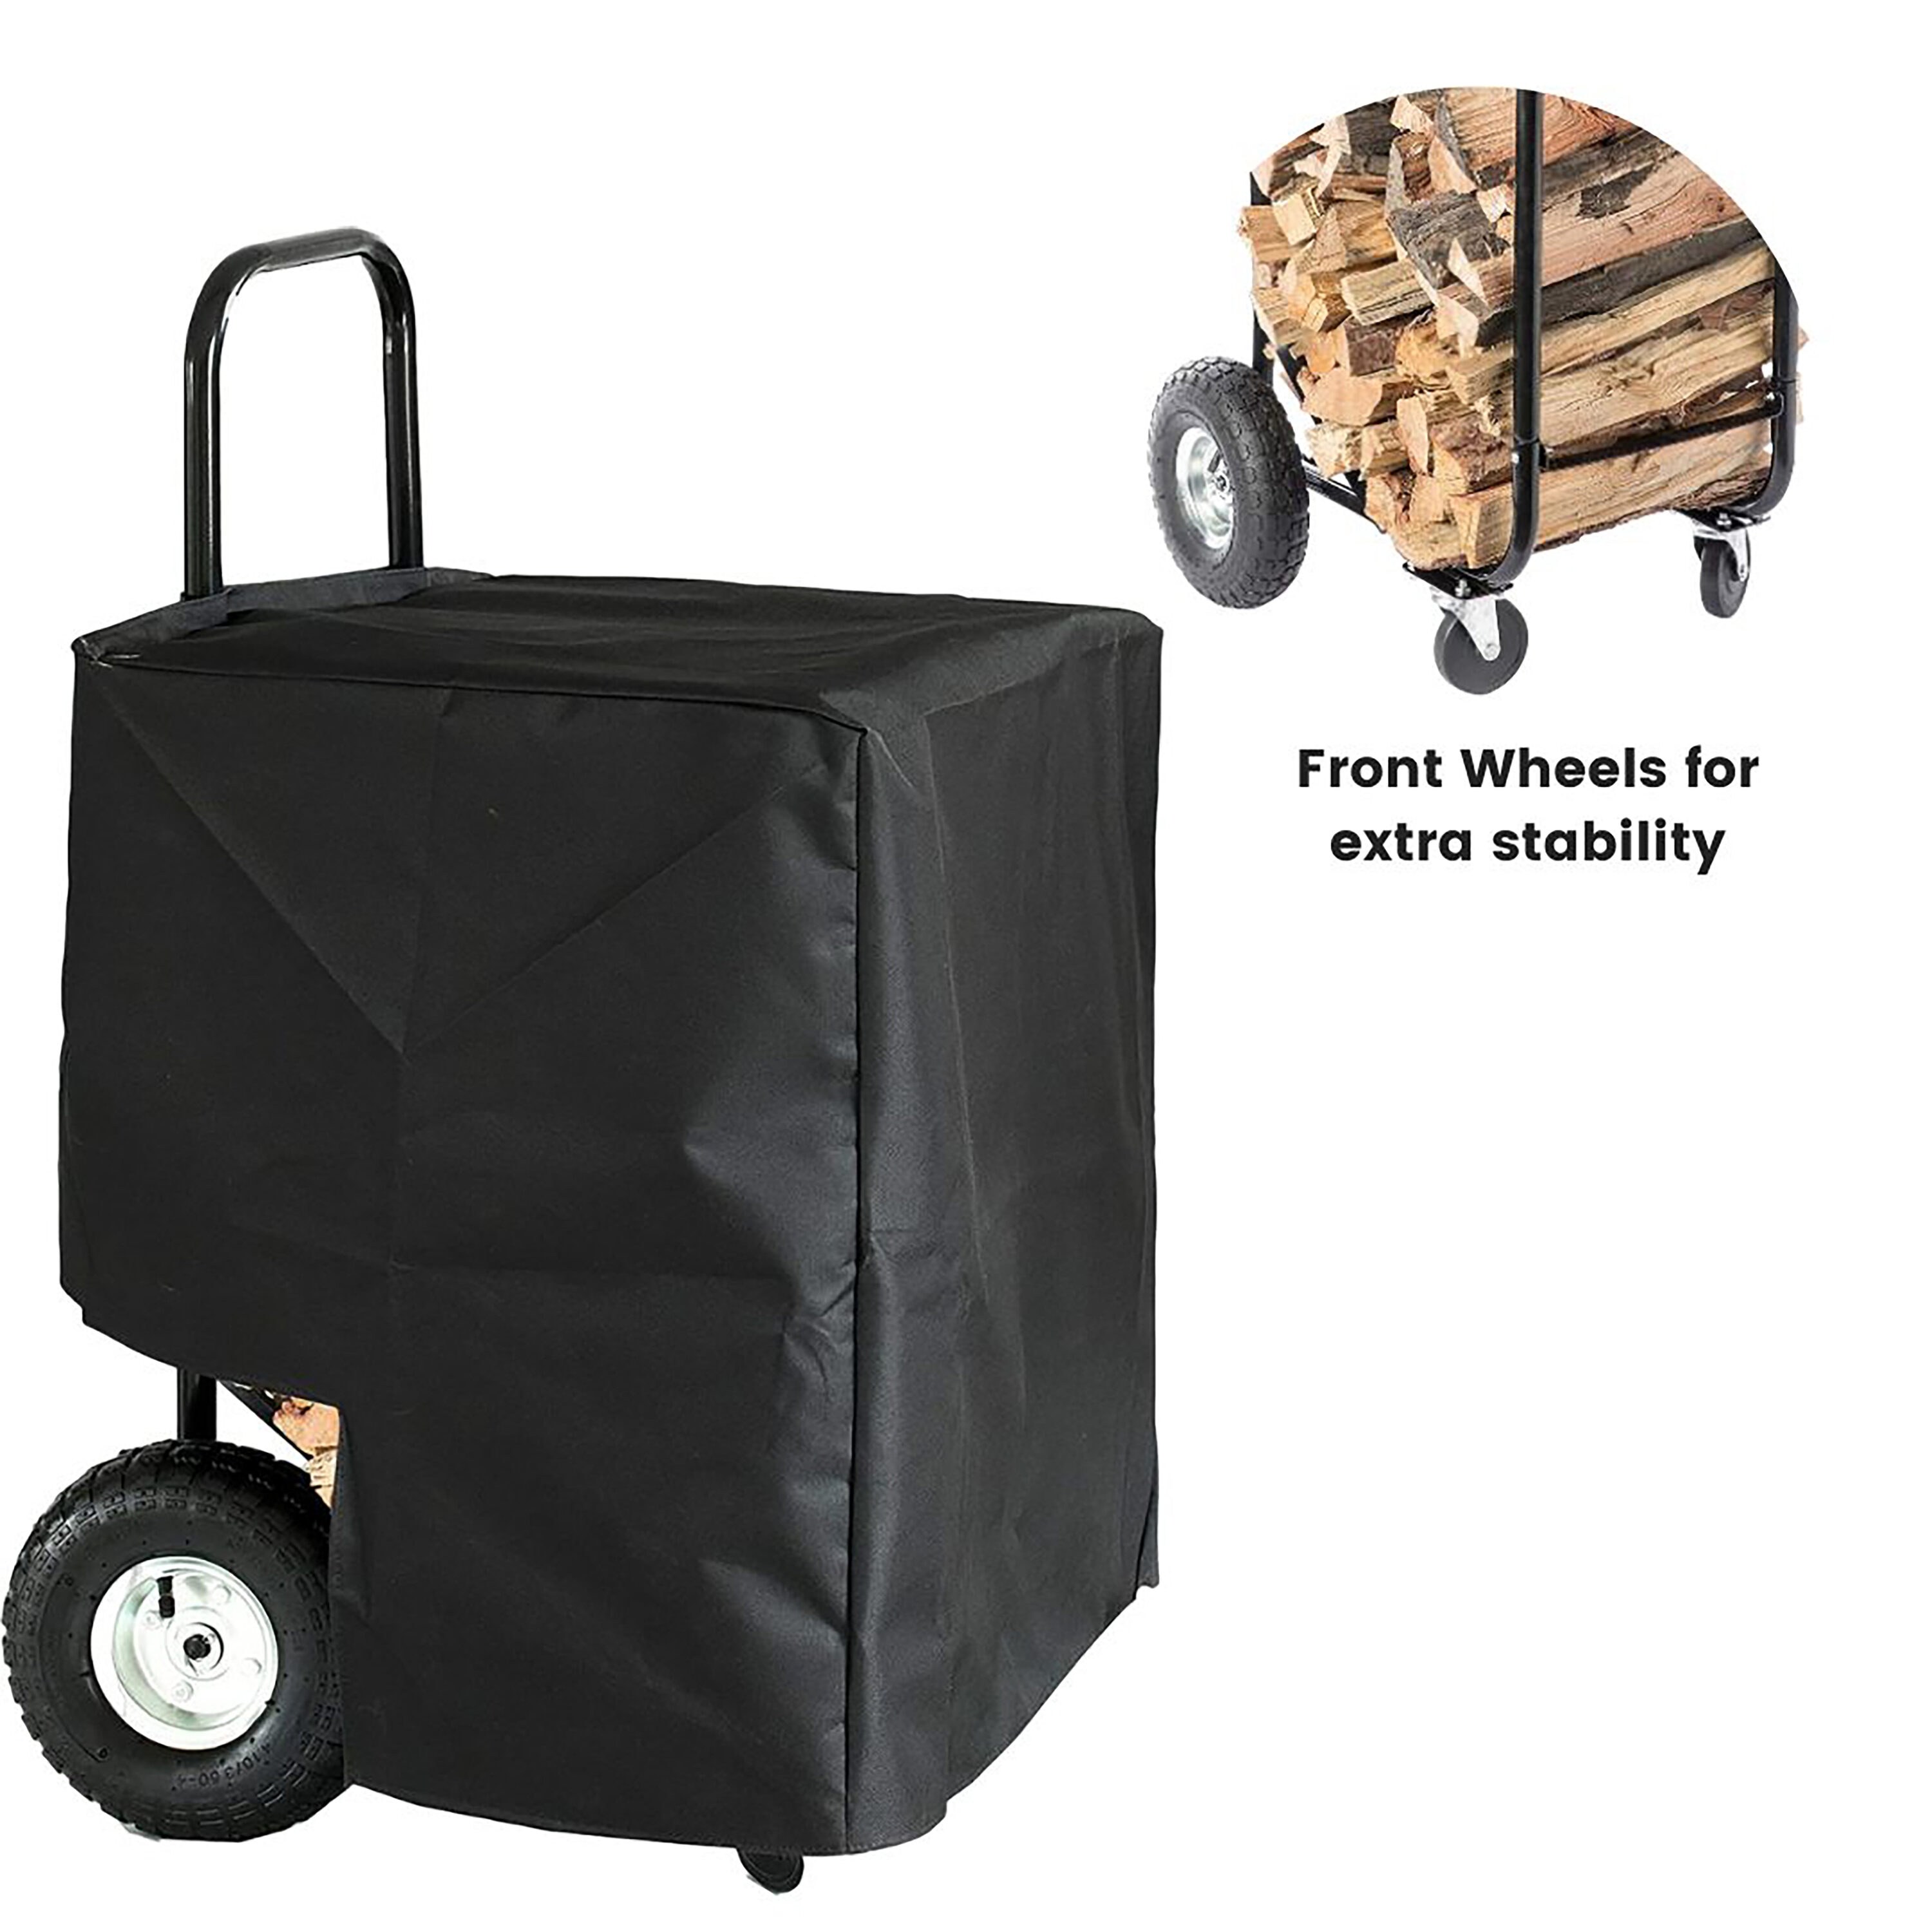 Alpine Industries ALP486-4 Cleaning Caddy 9-2/25W X 5-9/10D X 11-2/5 —  Janitorial Superstore